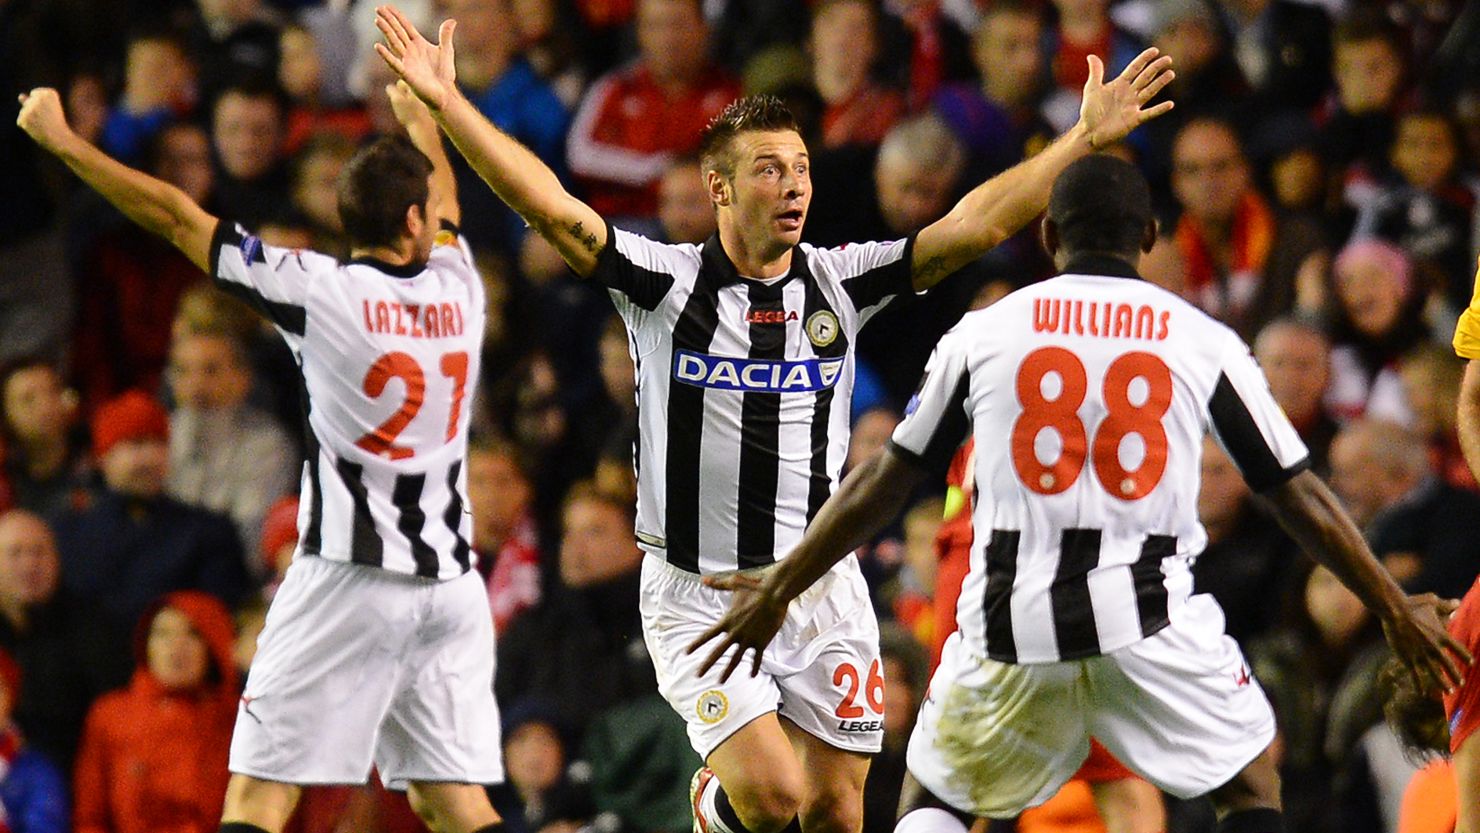 Udinese's Giovanni Pasquale celebrates his goal against Liverpool at Anfield that helped his club to a 3-2 win